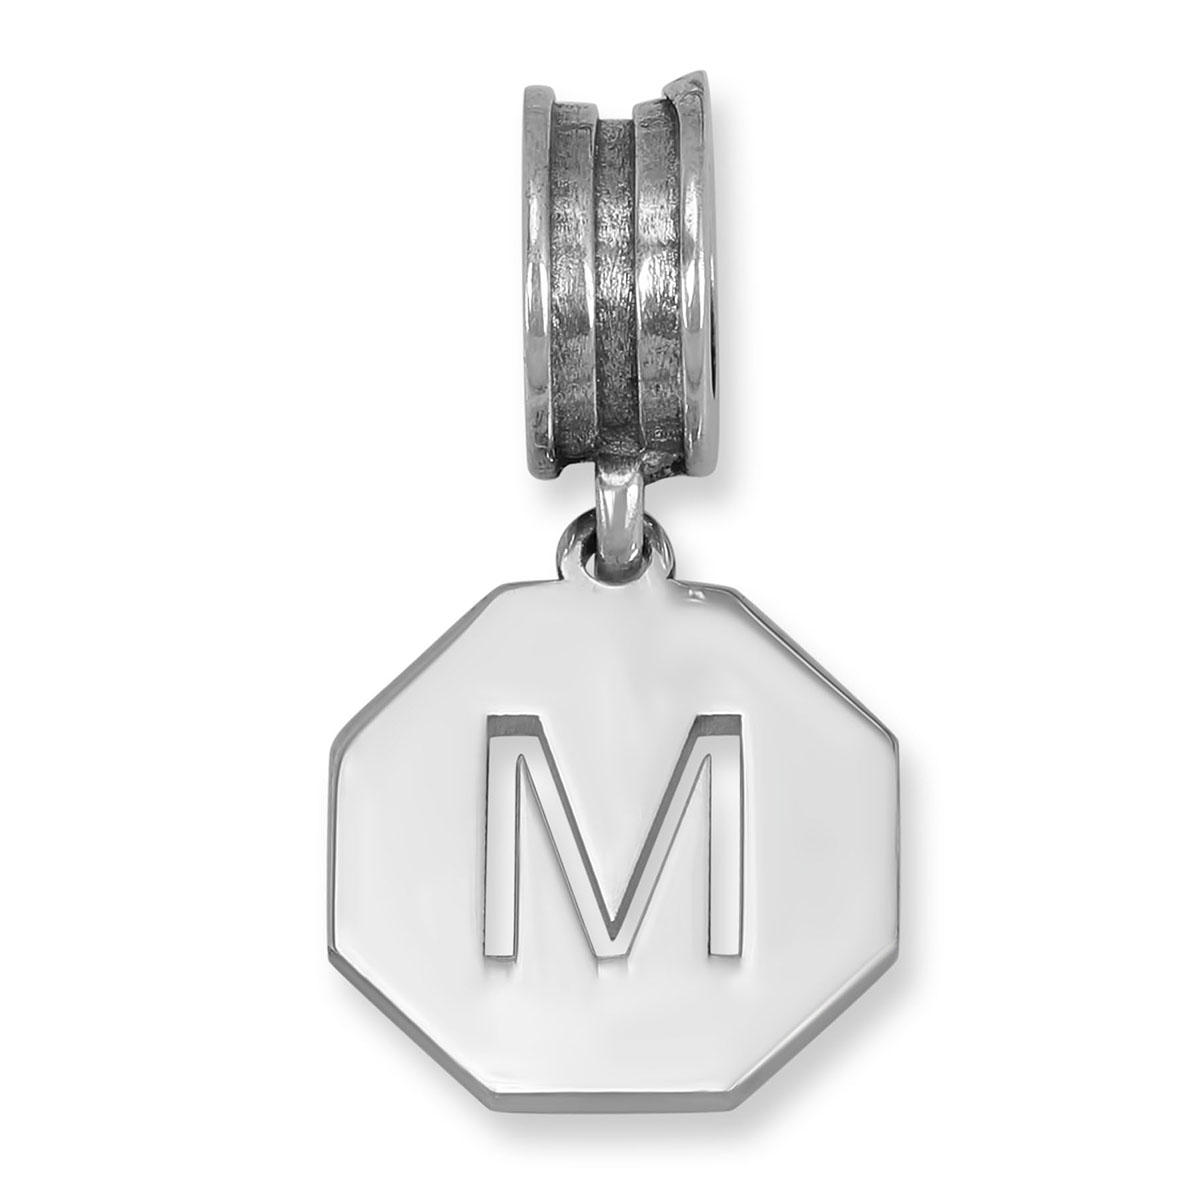 Octagon Sterling Silver Initial Charm (English / Hebrew)  - 1